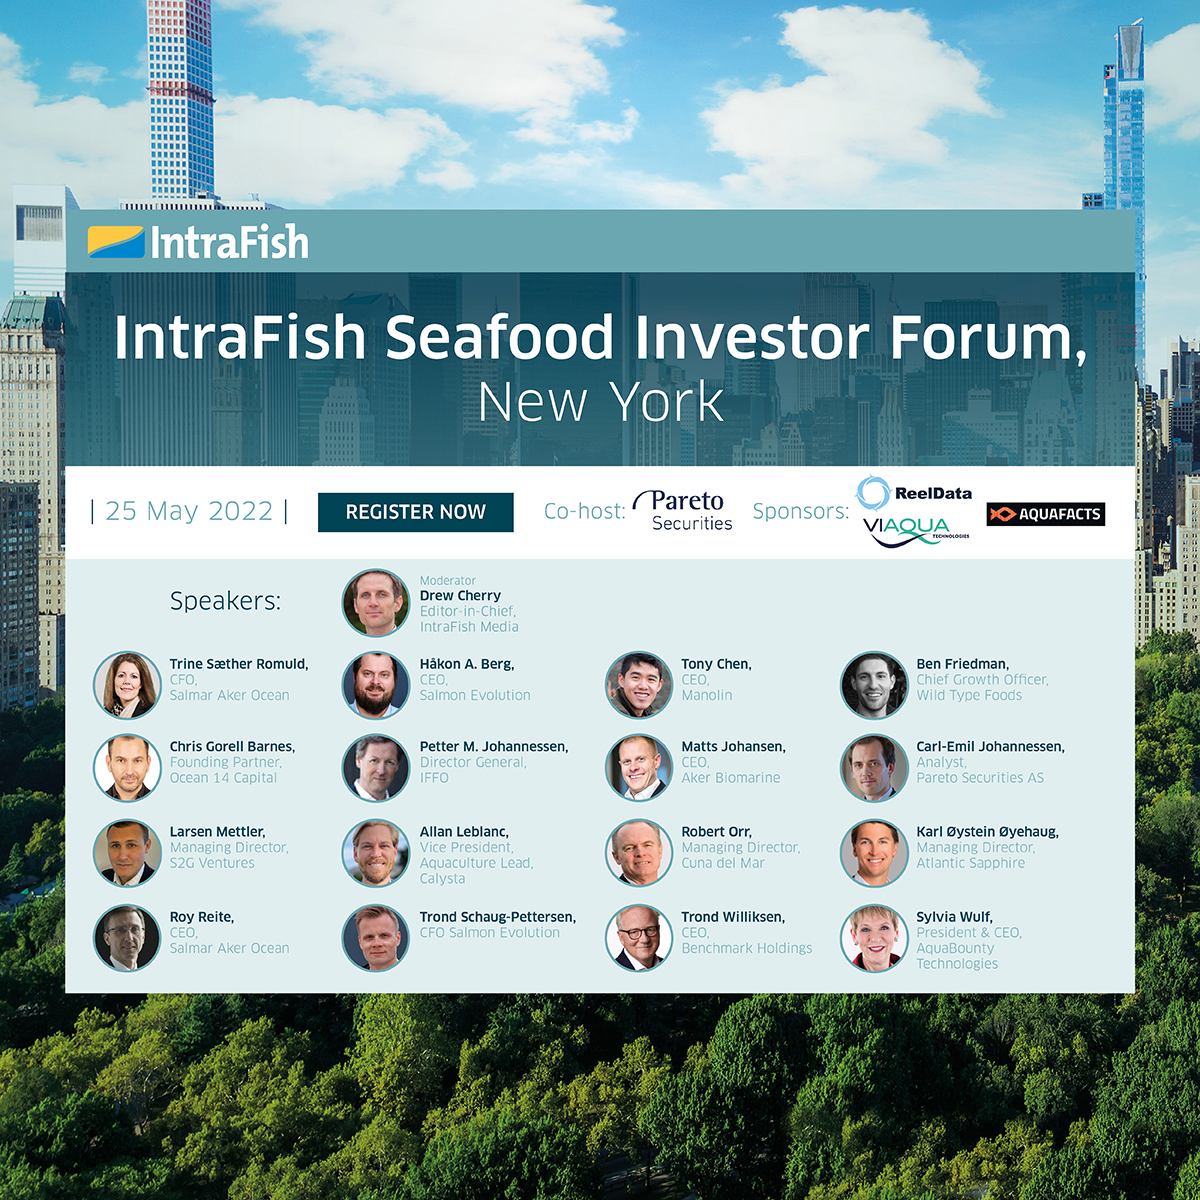 Meet the industry leaders who will be providing top tier discussions and presentations as we return to New York's to gather top seafood stakeholders and financiers to offer their insights on where they see growth, opportunities and profitability.

https://t.co/6RBKKRbeM7 https://t.co/5DHYS3J15z